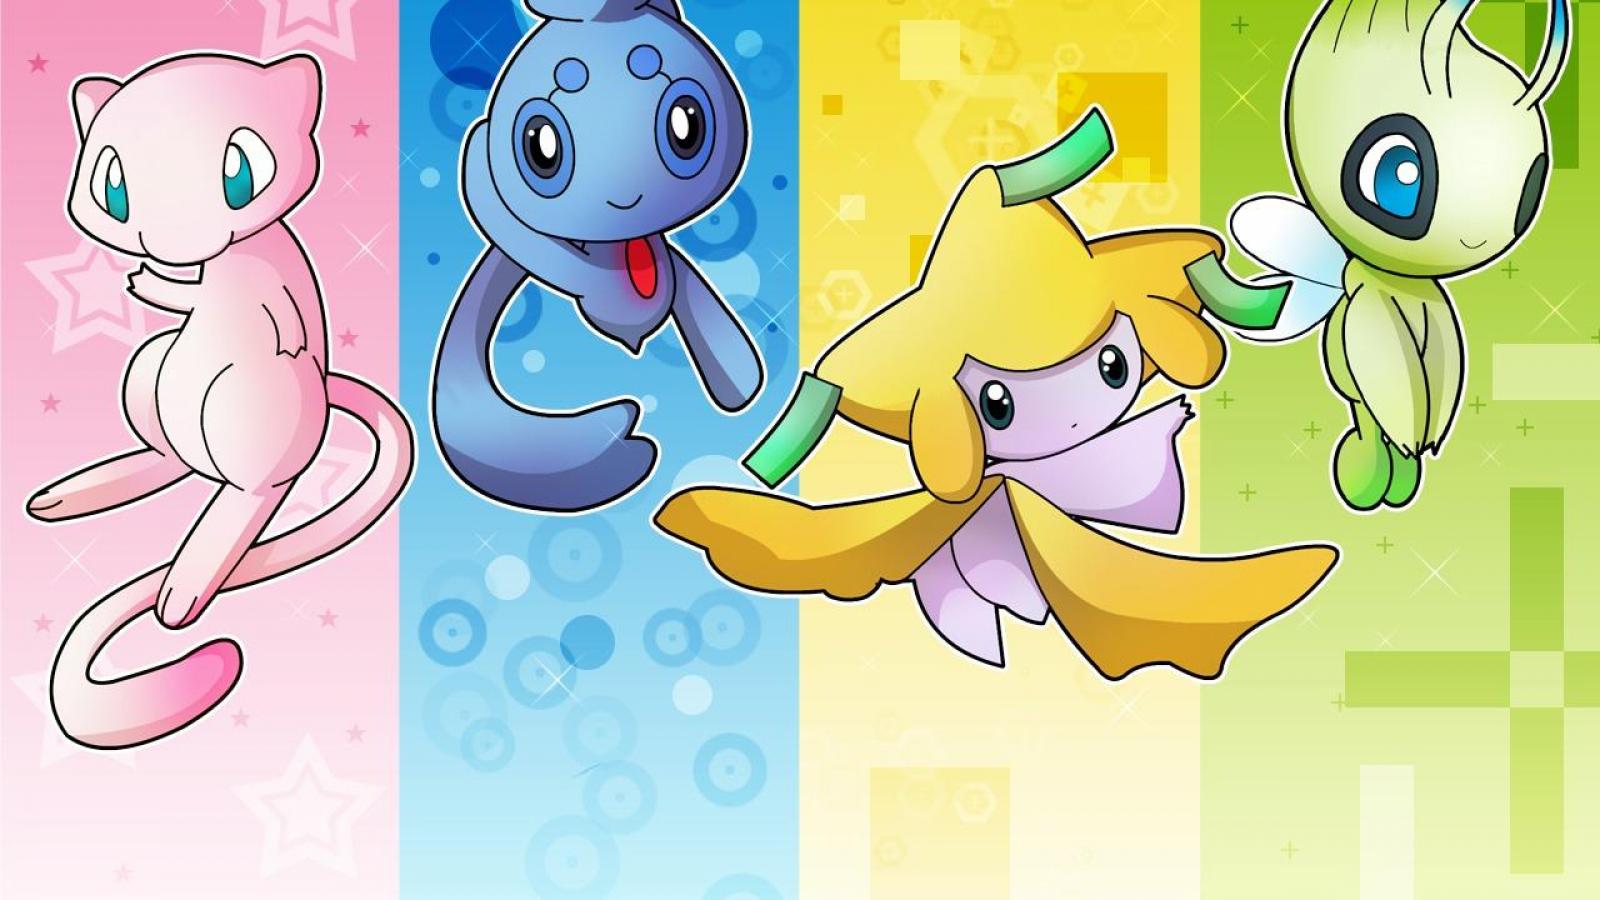 Mew Images 4 Amigos Hd Wallpaper And Background Photos - Cute Pokemon -  1600x900 Wallpaper 